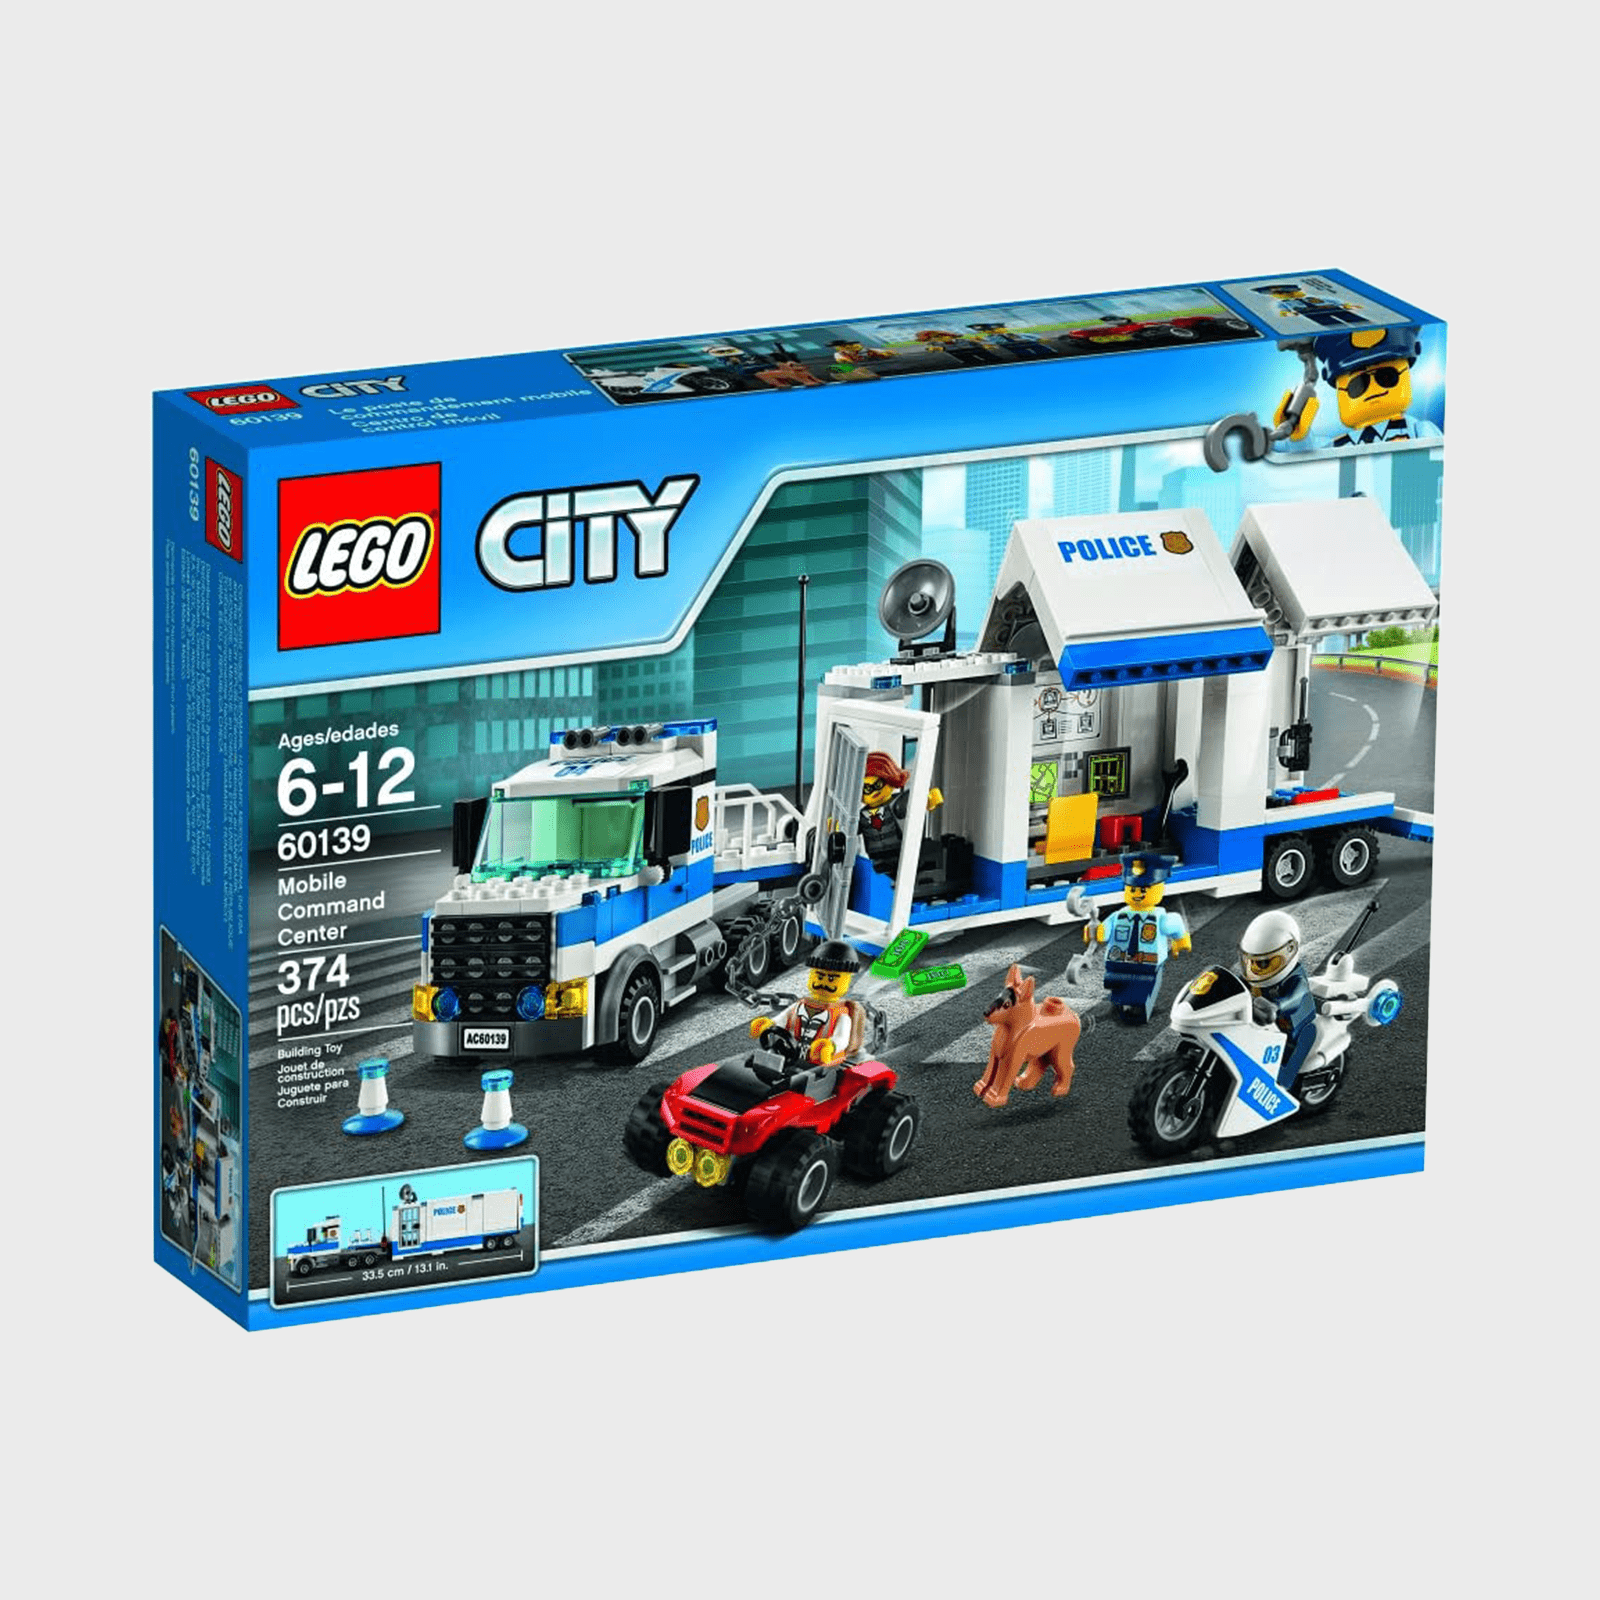 Holiday Gift Ideas: Lego Sets for Girls for Any Budget • The Simple Parent